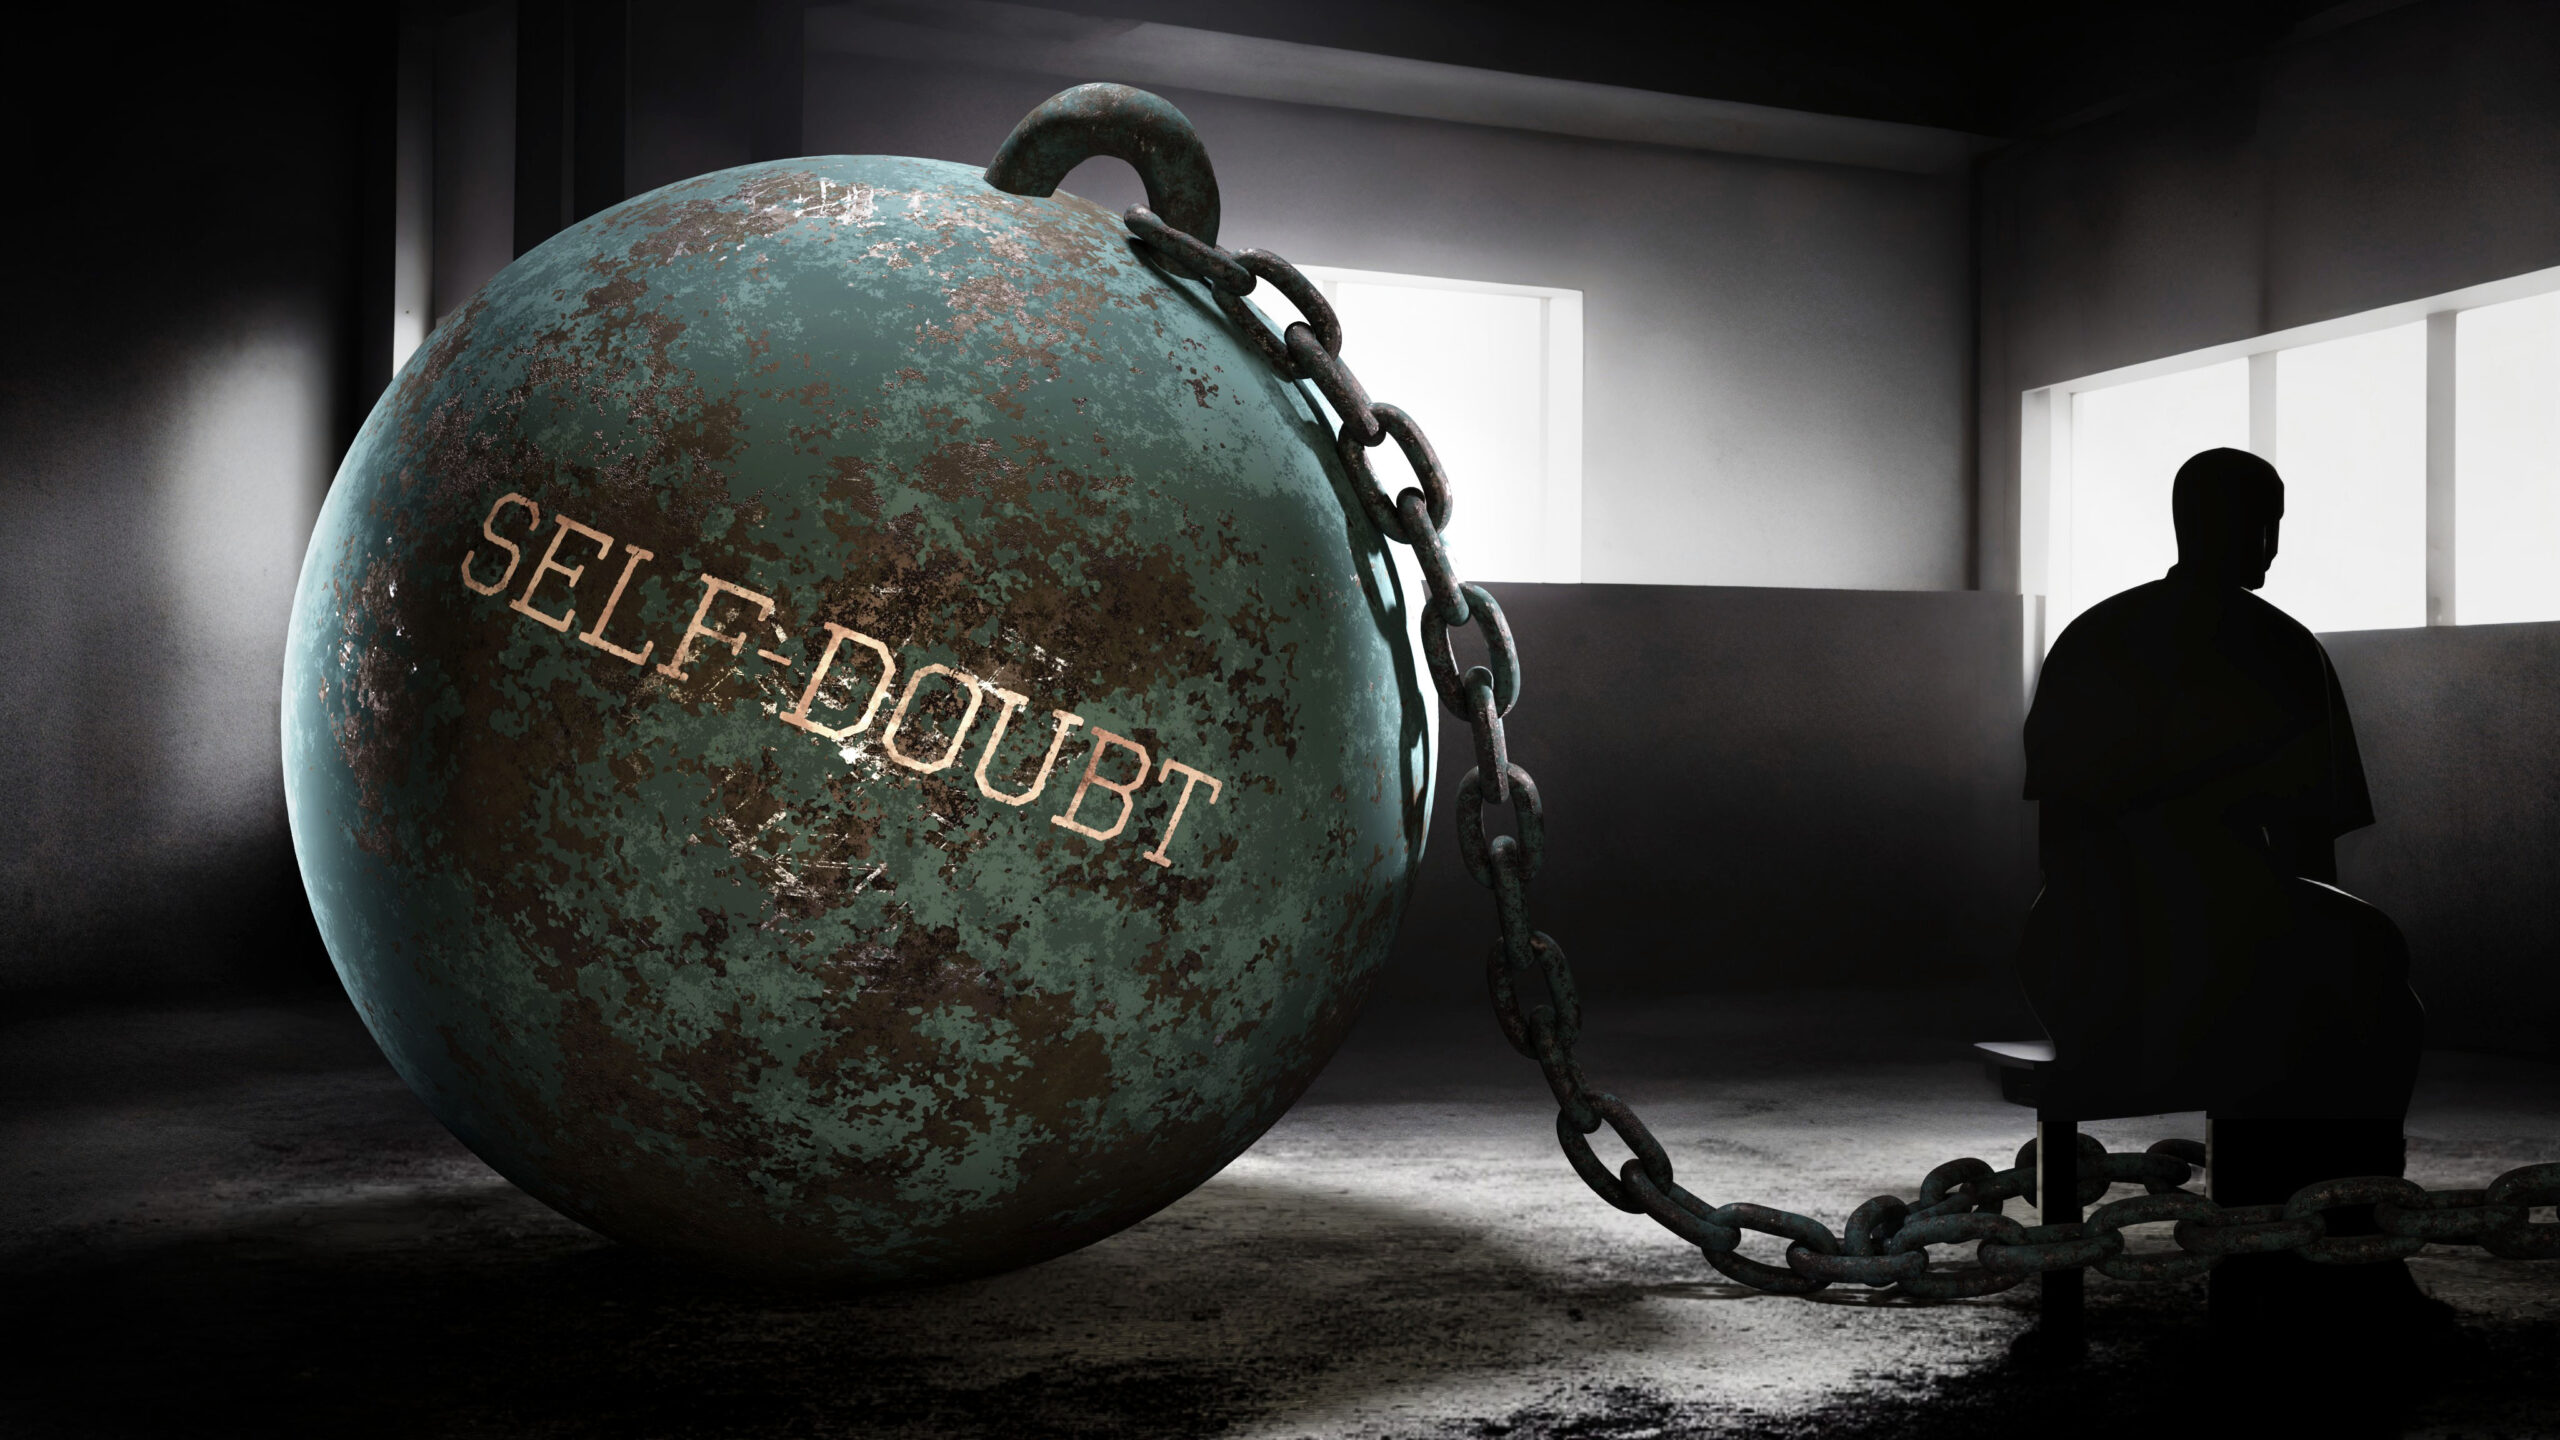 A man sits in a dark room, with a chain around his ankle that connects him to a giant ball. The words "self-doubt" are written on the ball.